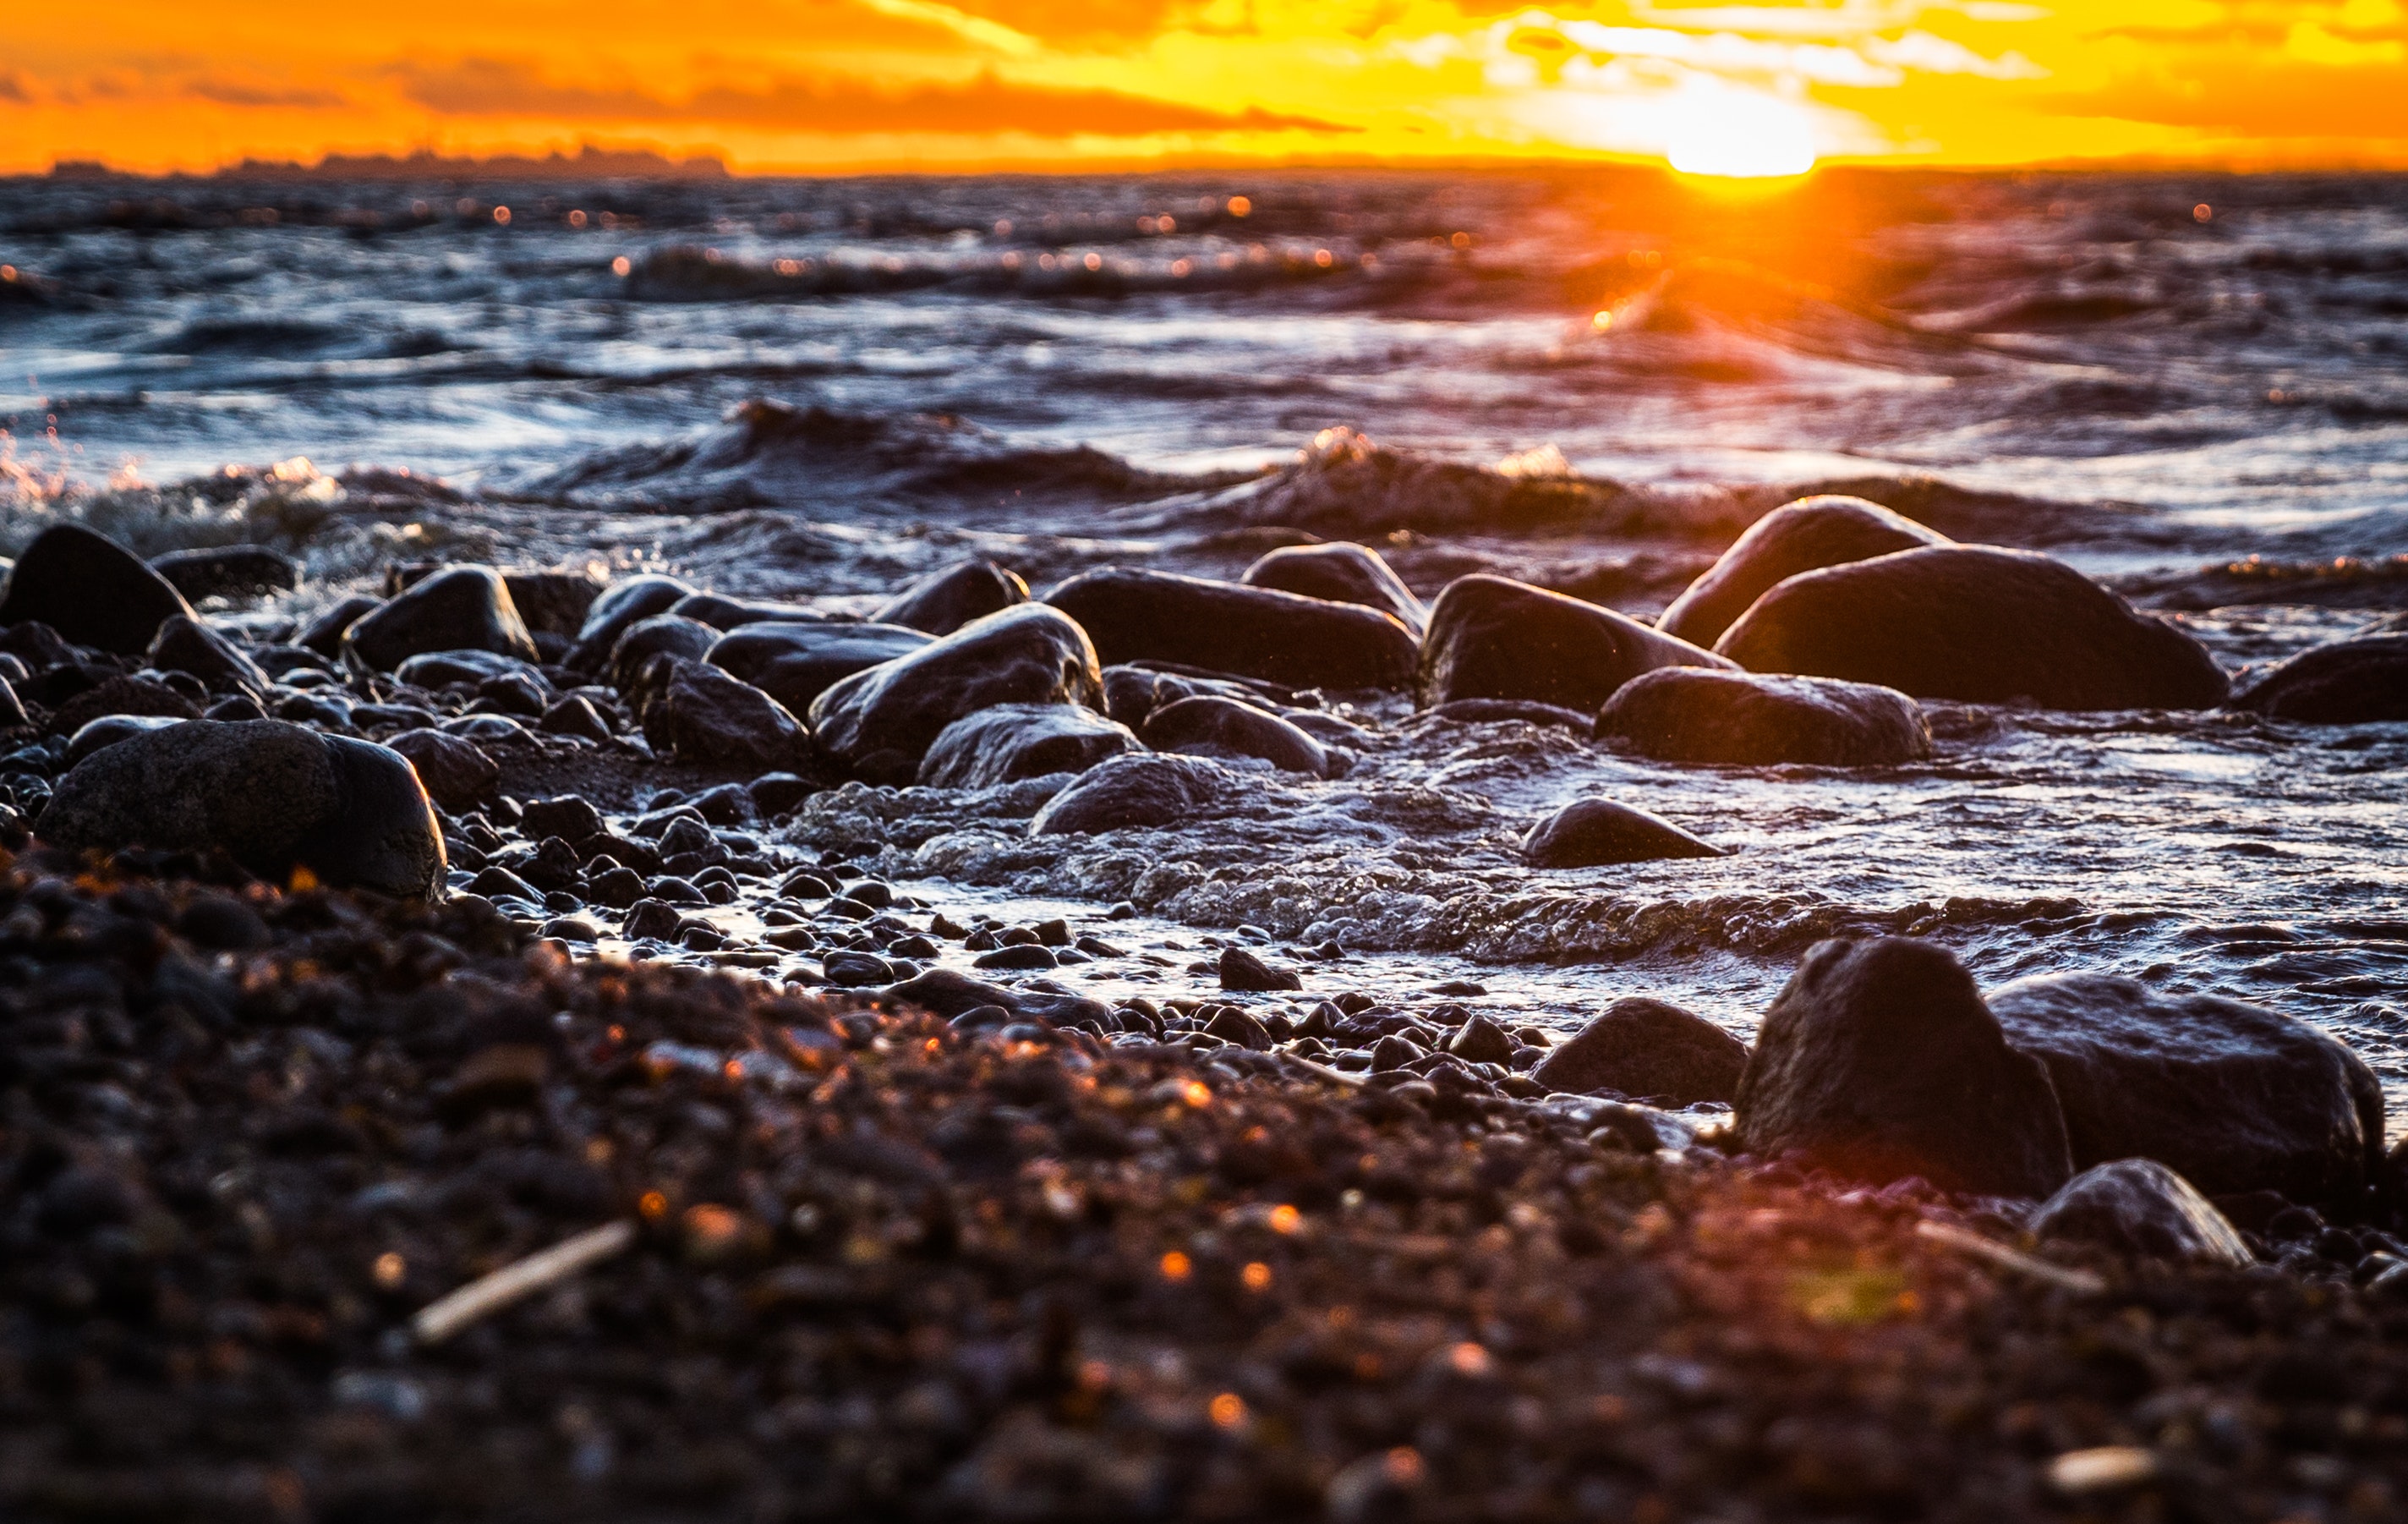 Stones Surrounded by Body of Water during Sunset, Beach, Water, Travel, Tide, HQ Photo